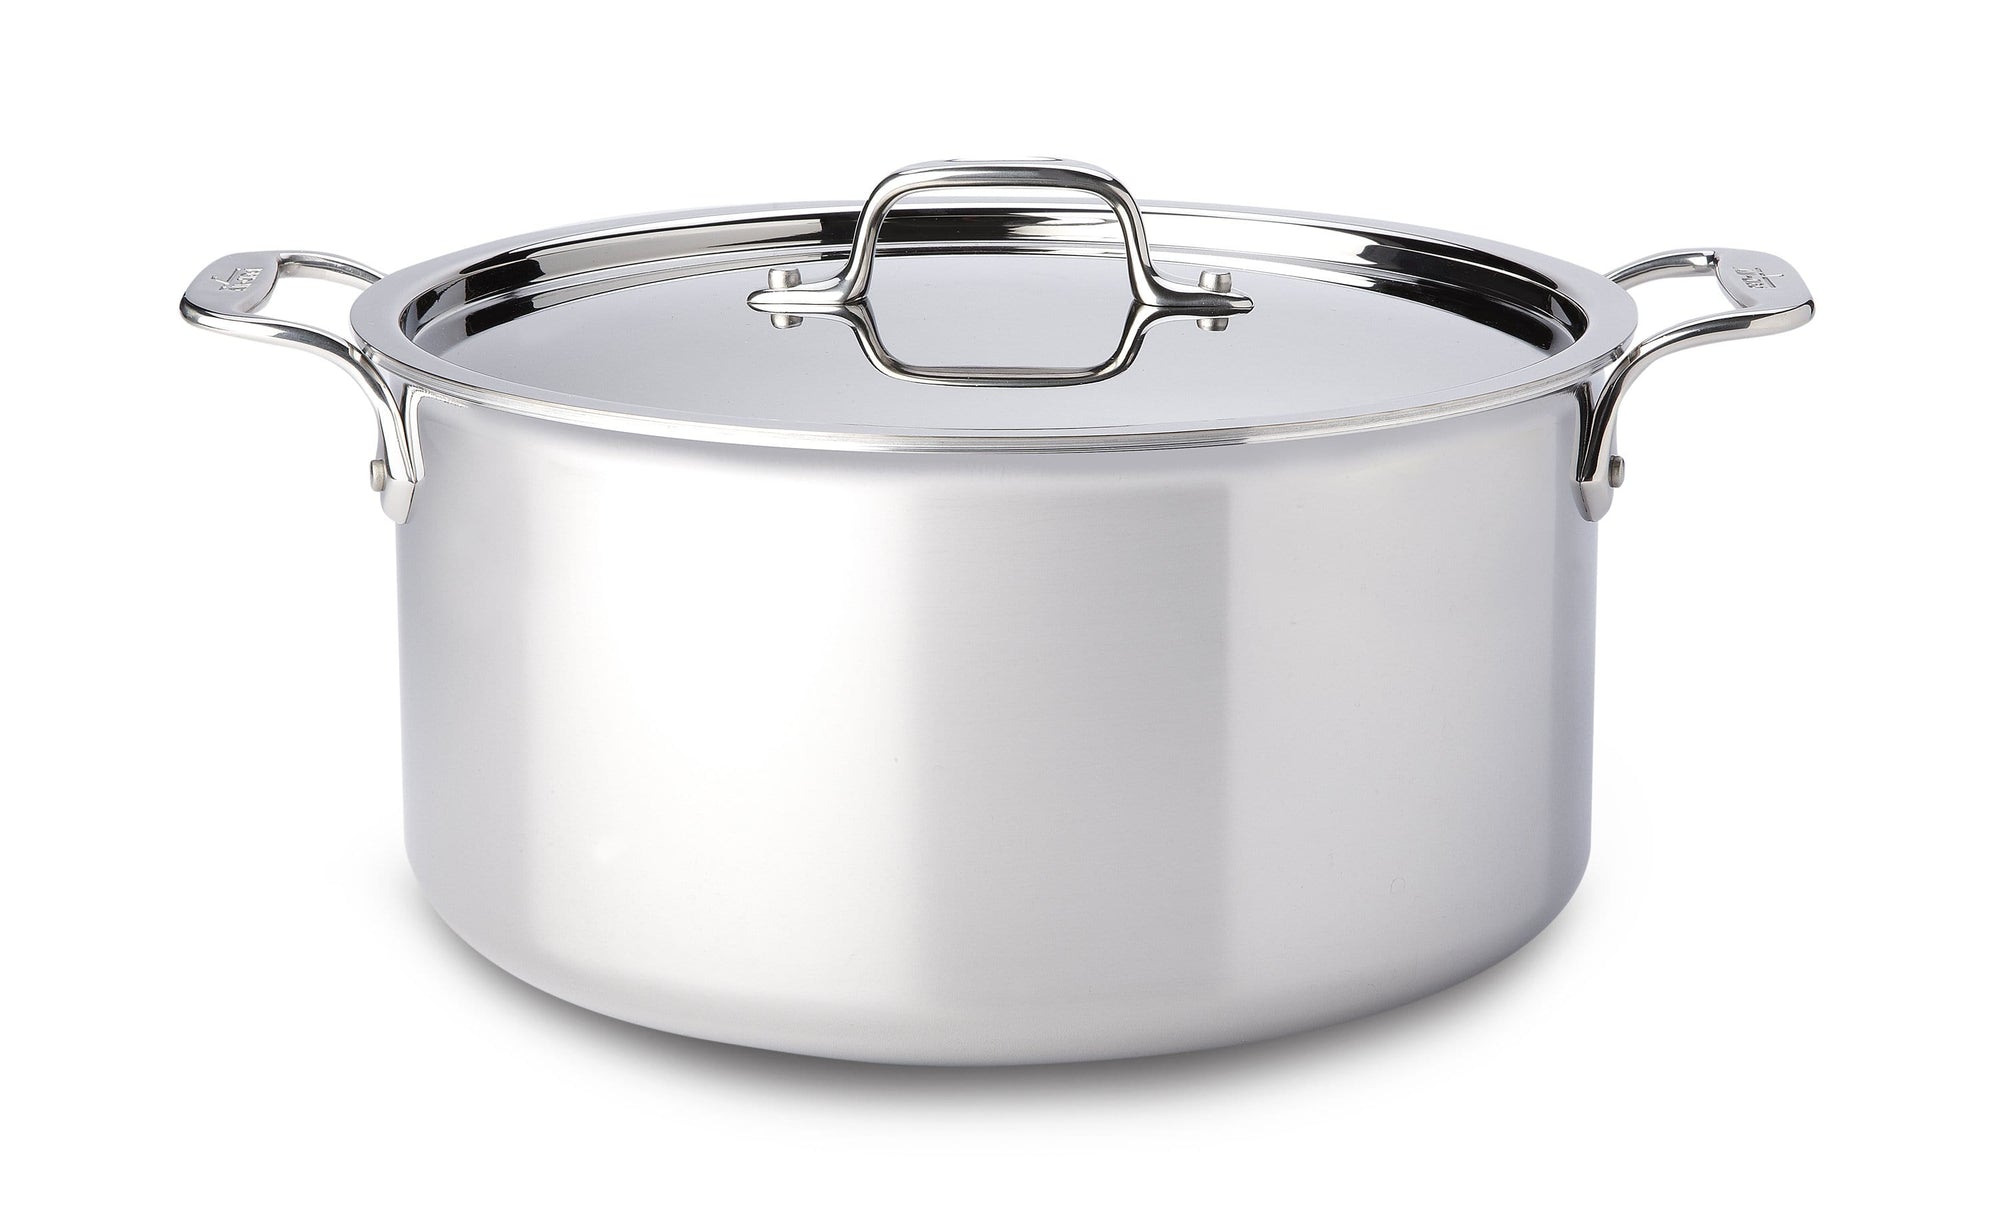 Cuisinart Stockpot 8 Quart Cover Lid 766-24 Chefs Classic 18/10 Stainless  Steel